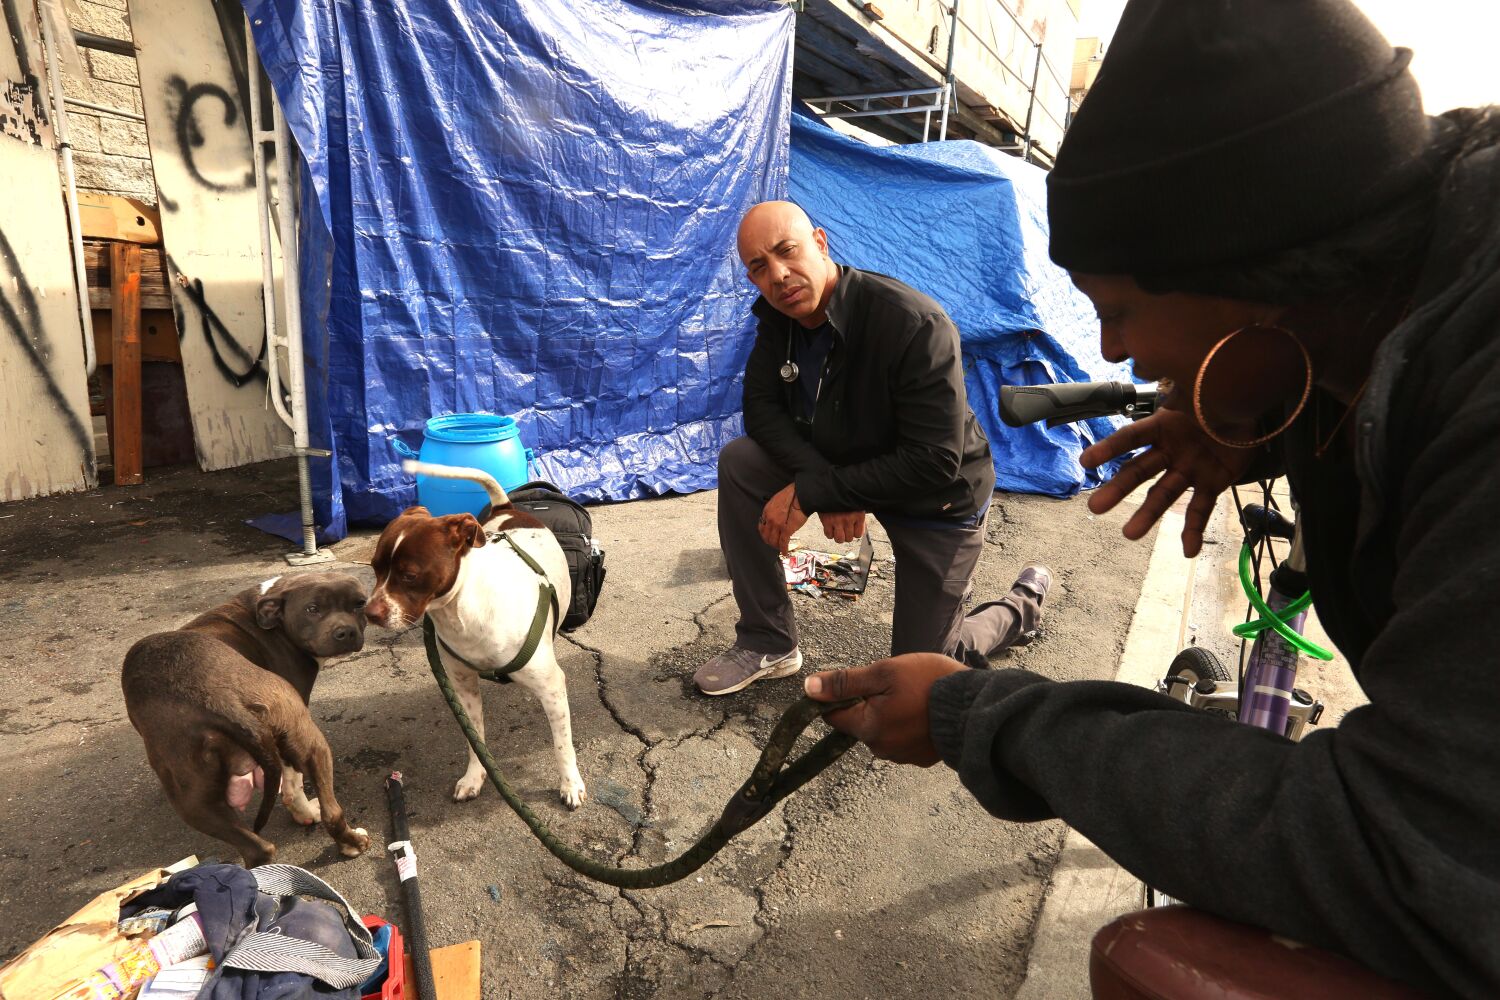 Crusading vet treats some of L.A.’s most cherished residents: The pets of skid row